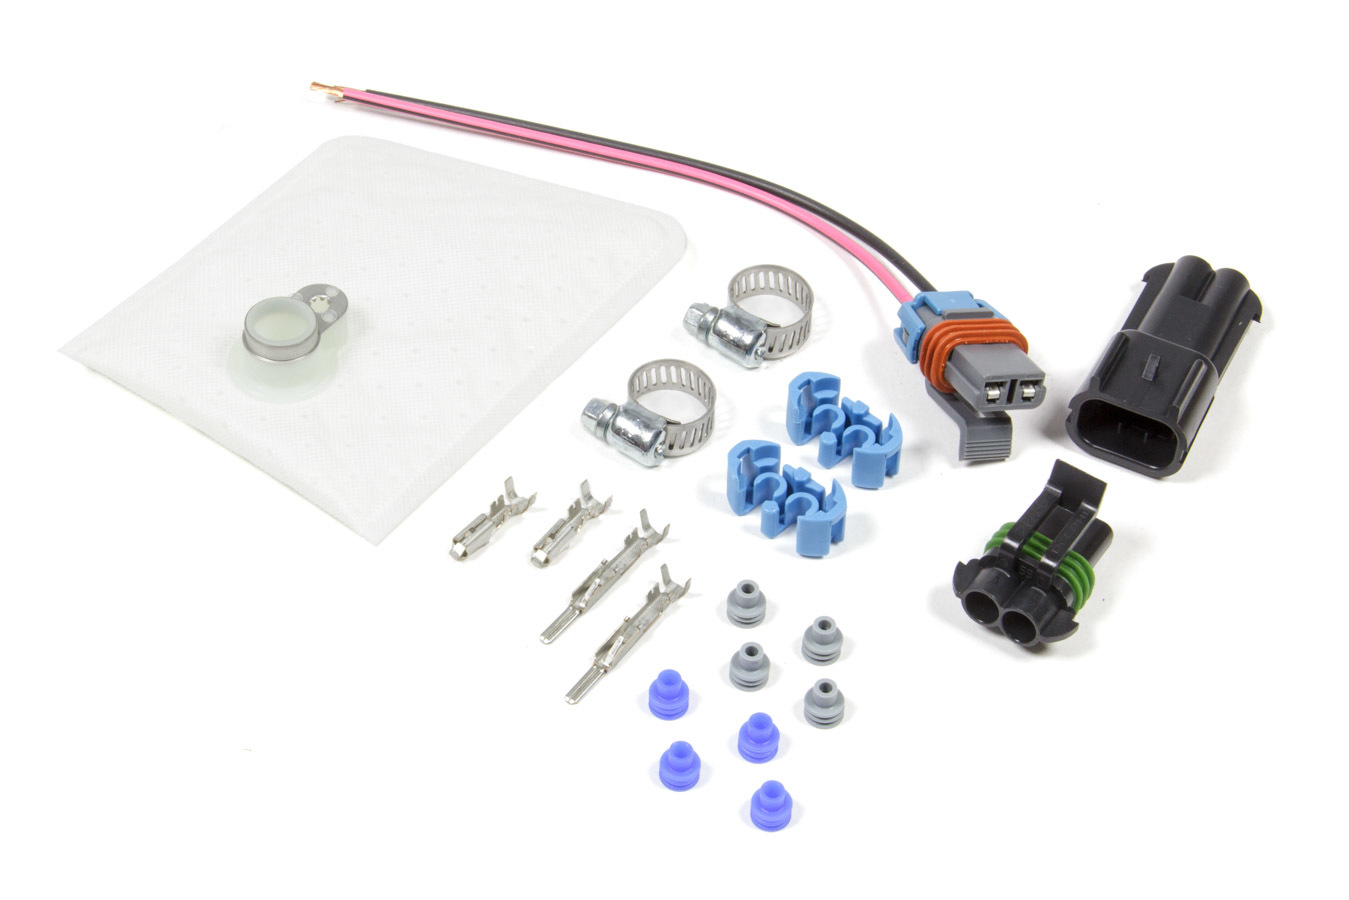 Walbro 450 LPH E85 Compatible Fuel Pump Wiring Harness, Filter, Clamp Kit for C6 Corvette